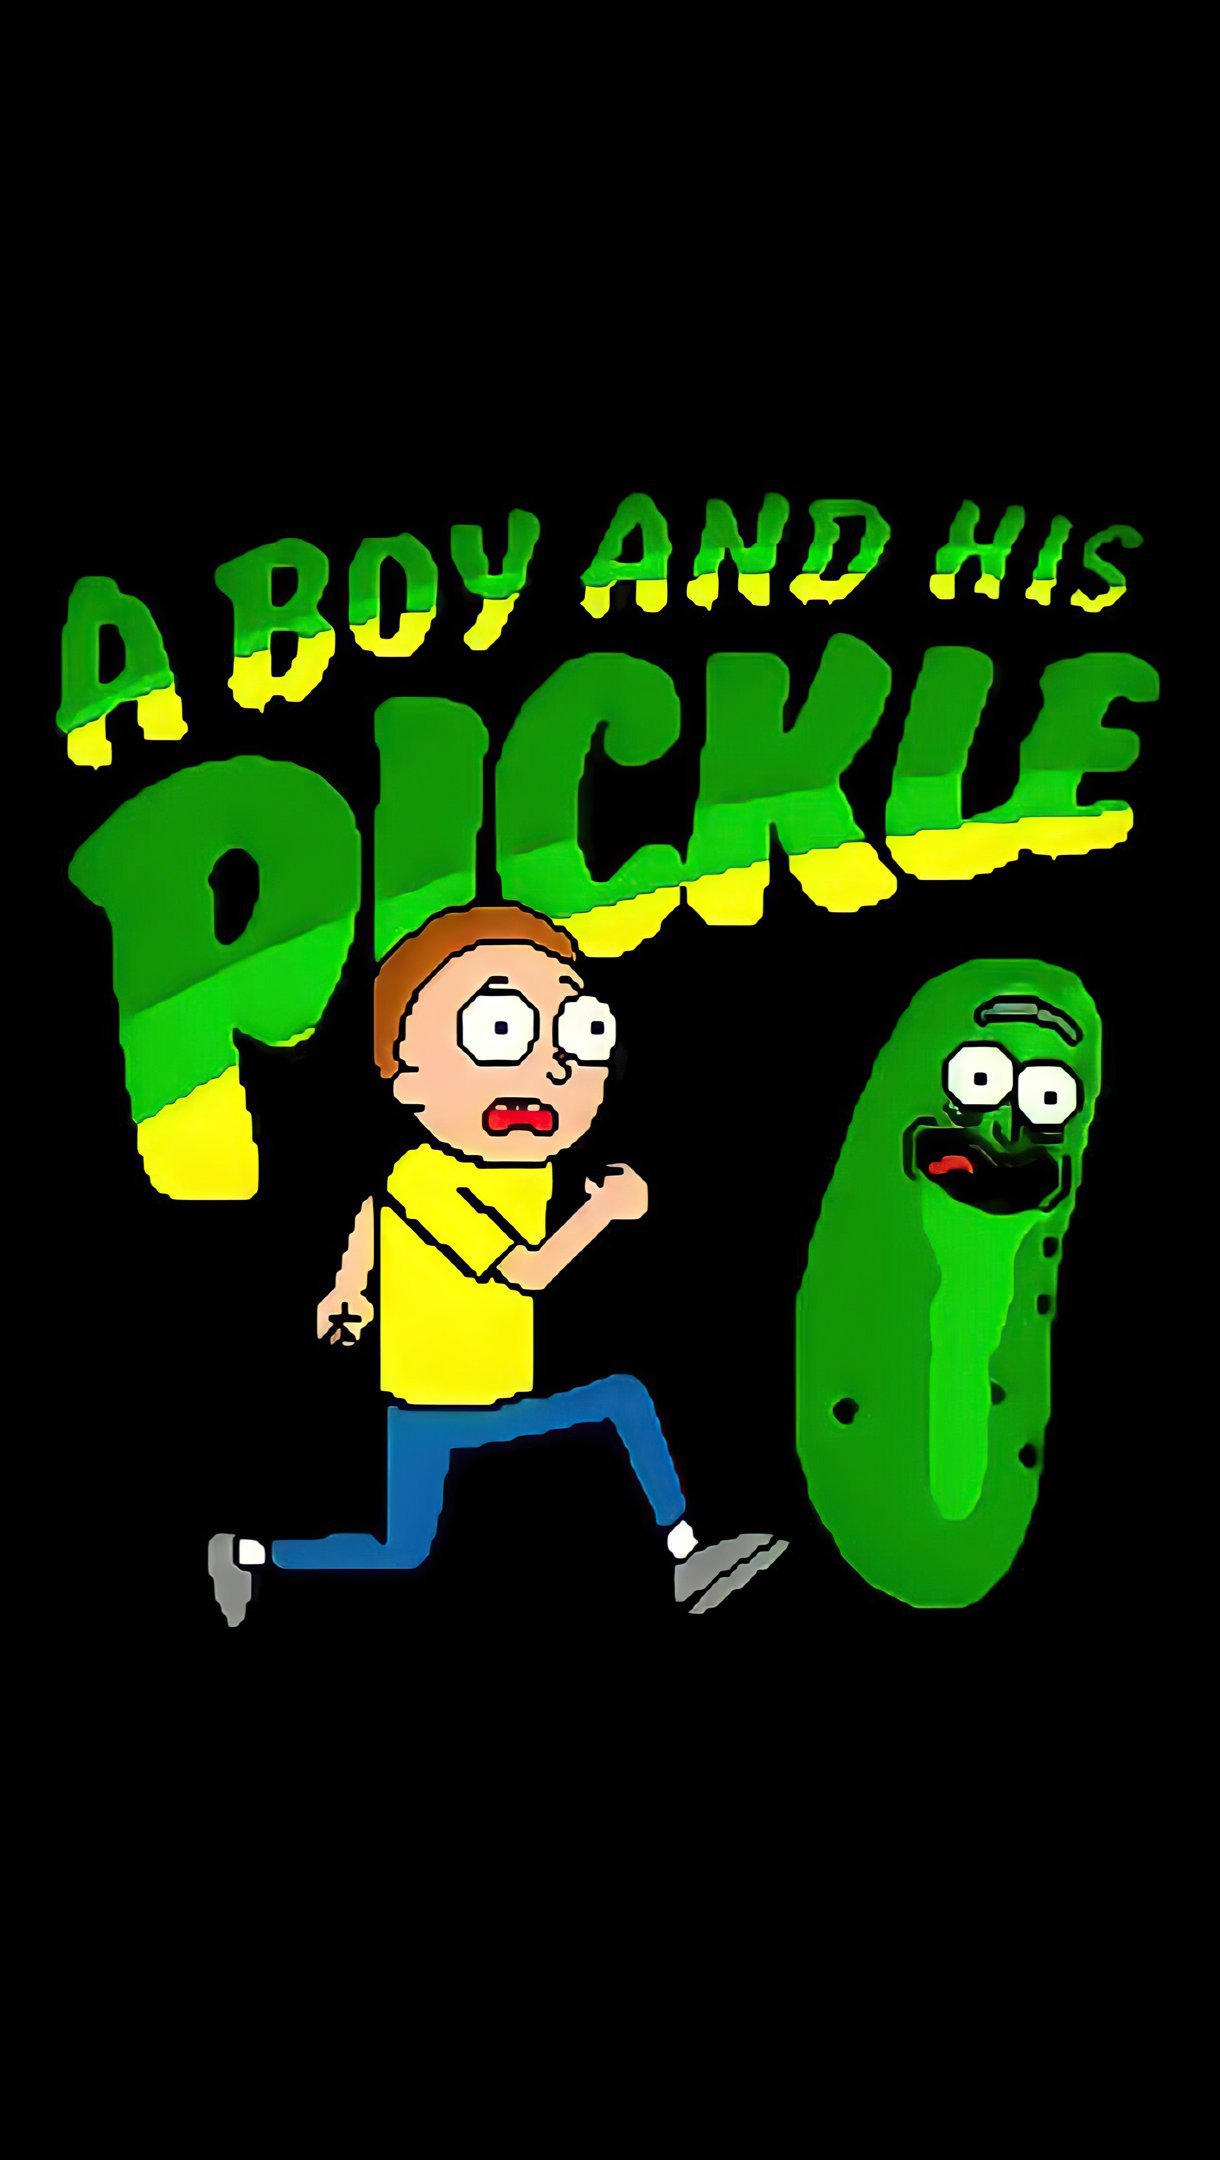 Wallpaper Morty with pickle Vertical